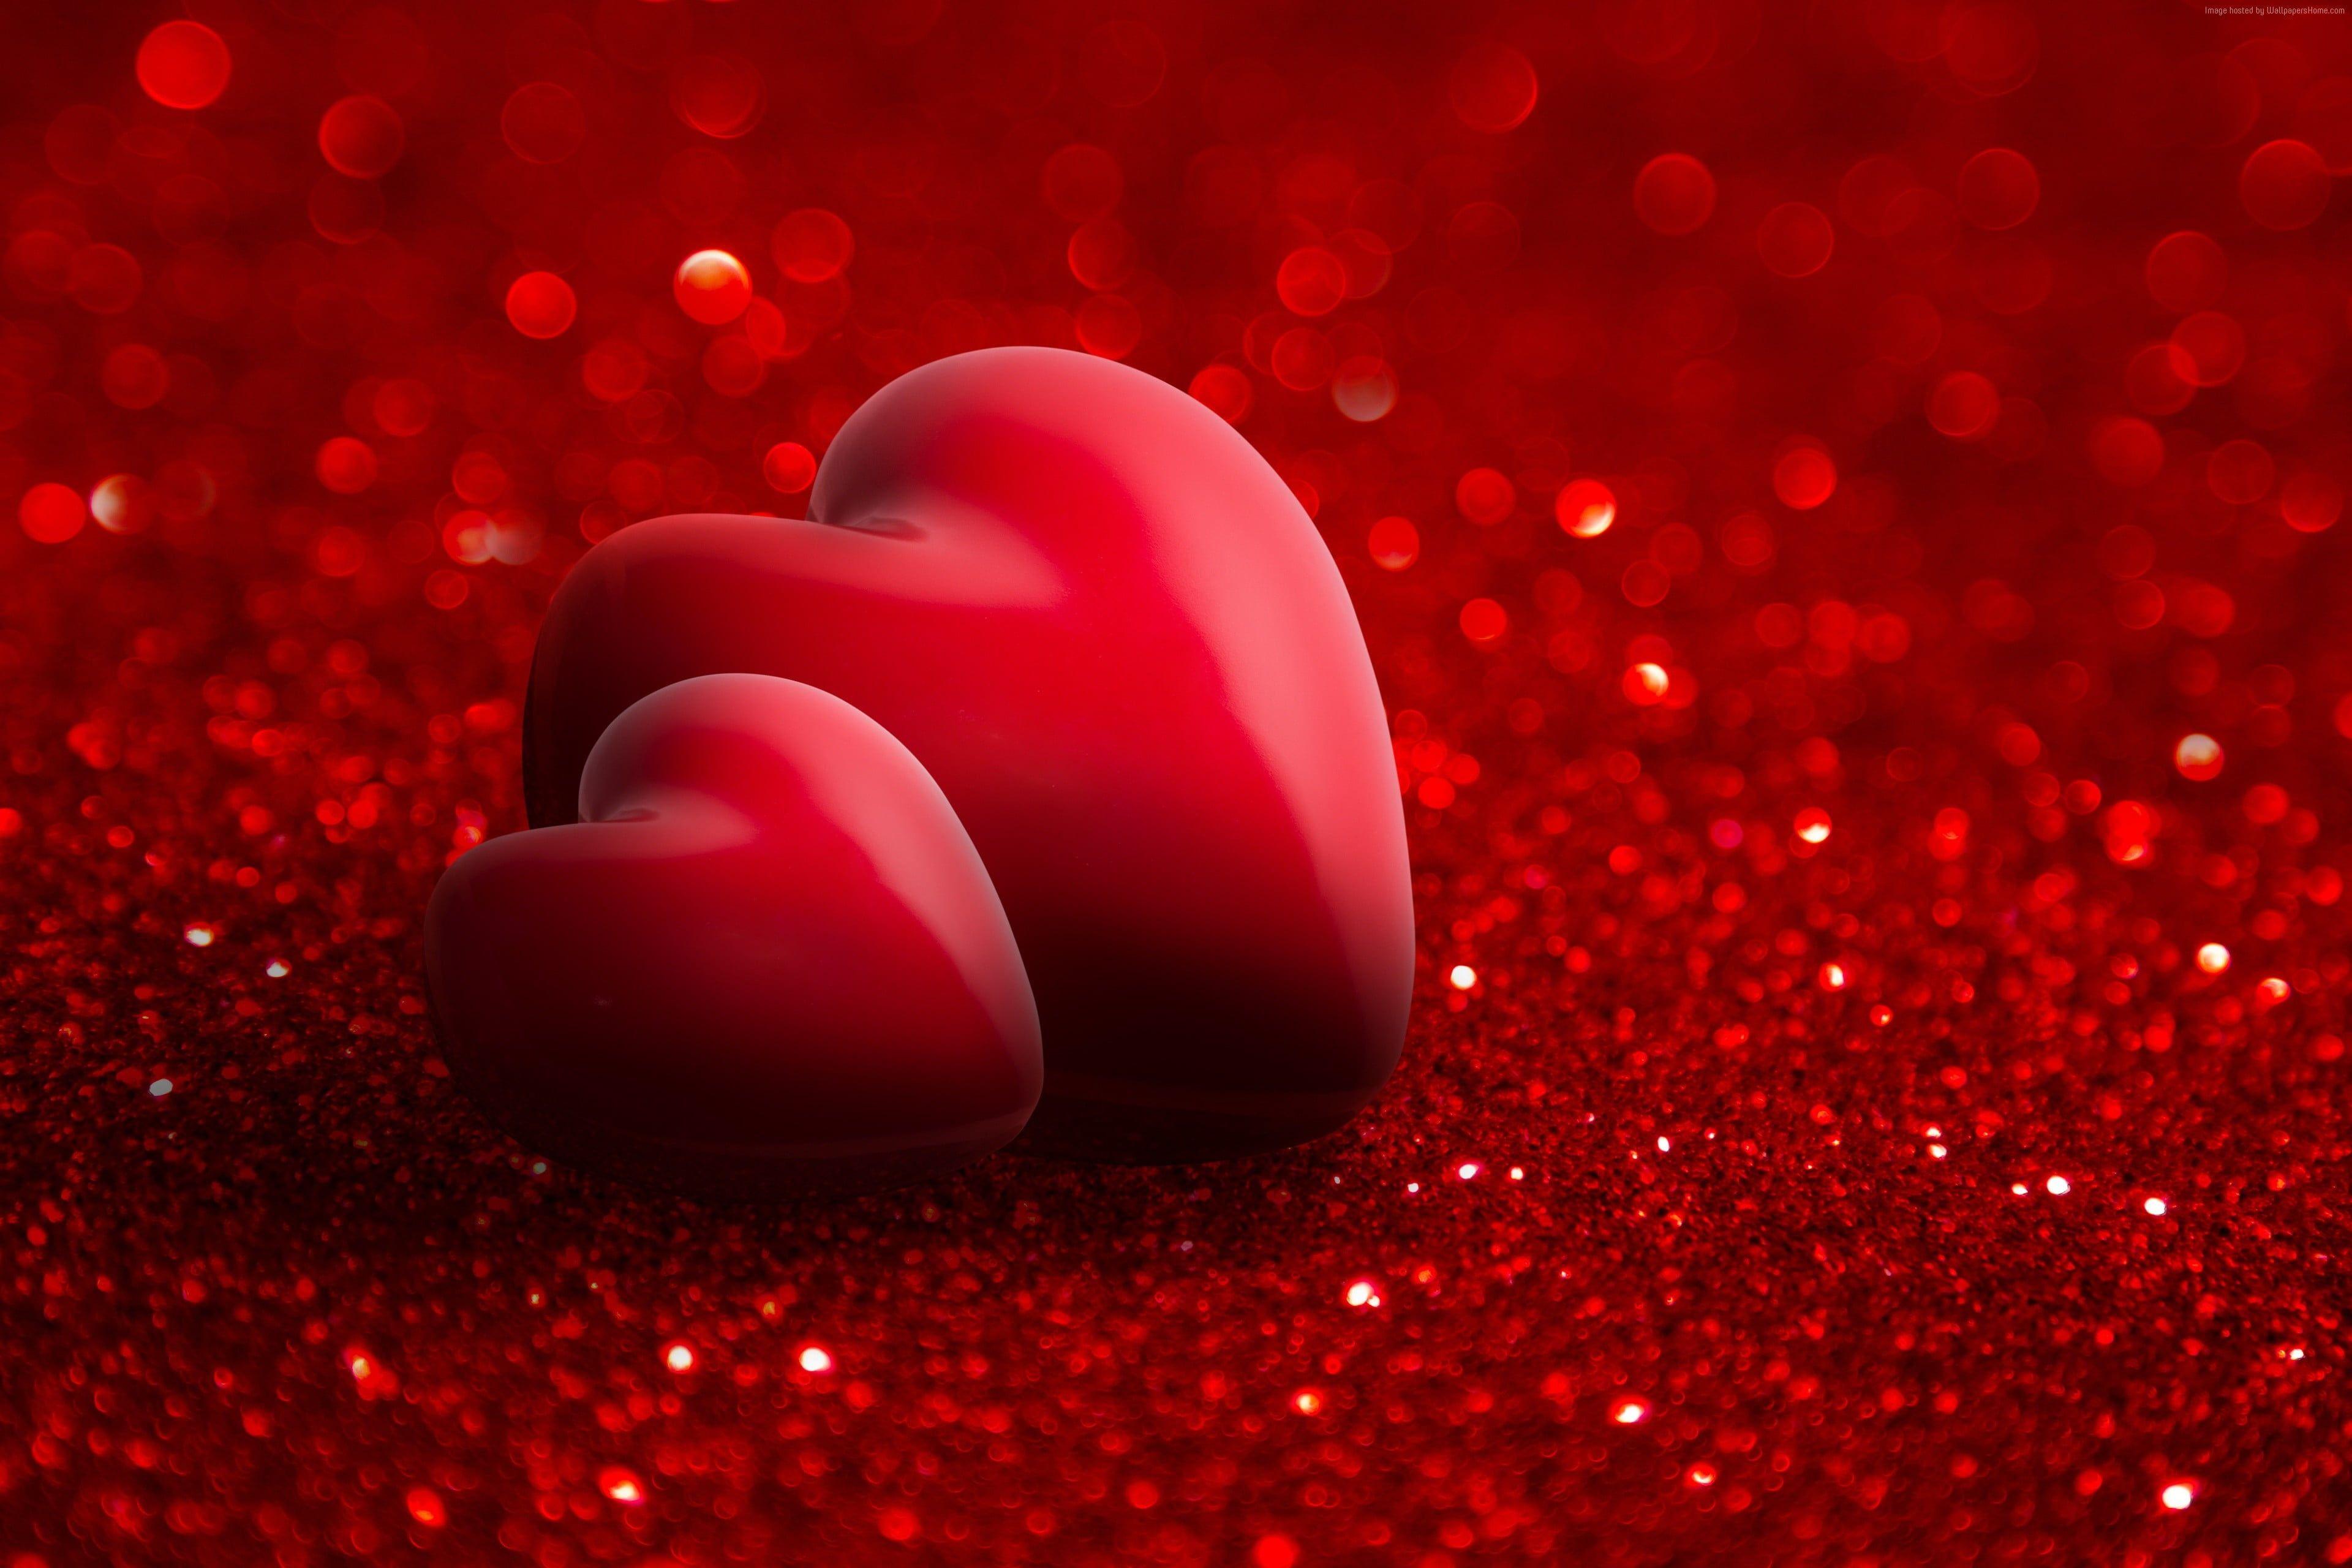 Red Heart Background Images  Free Download on Freepik